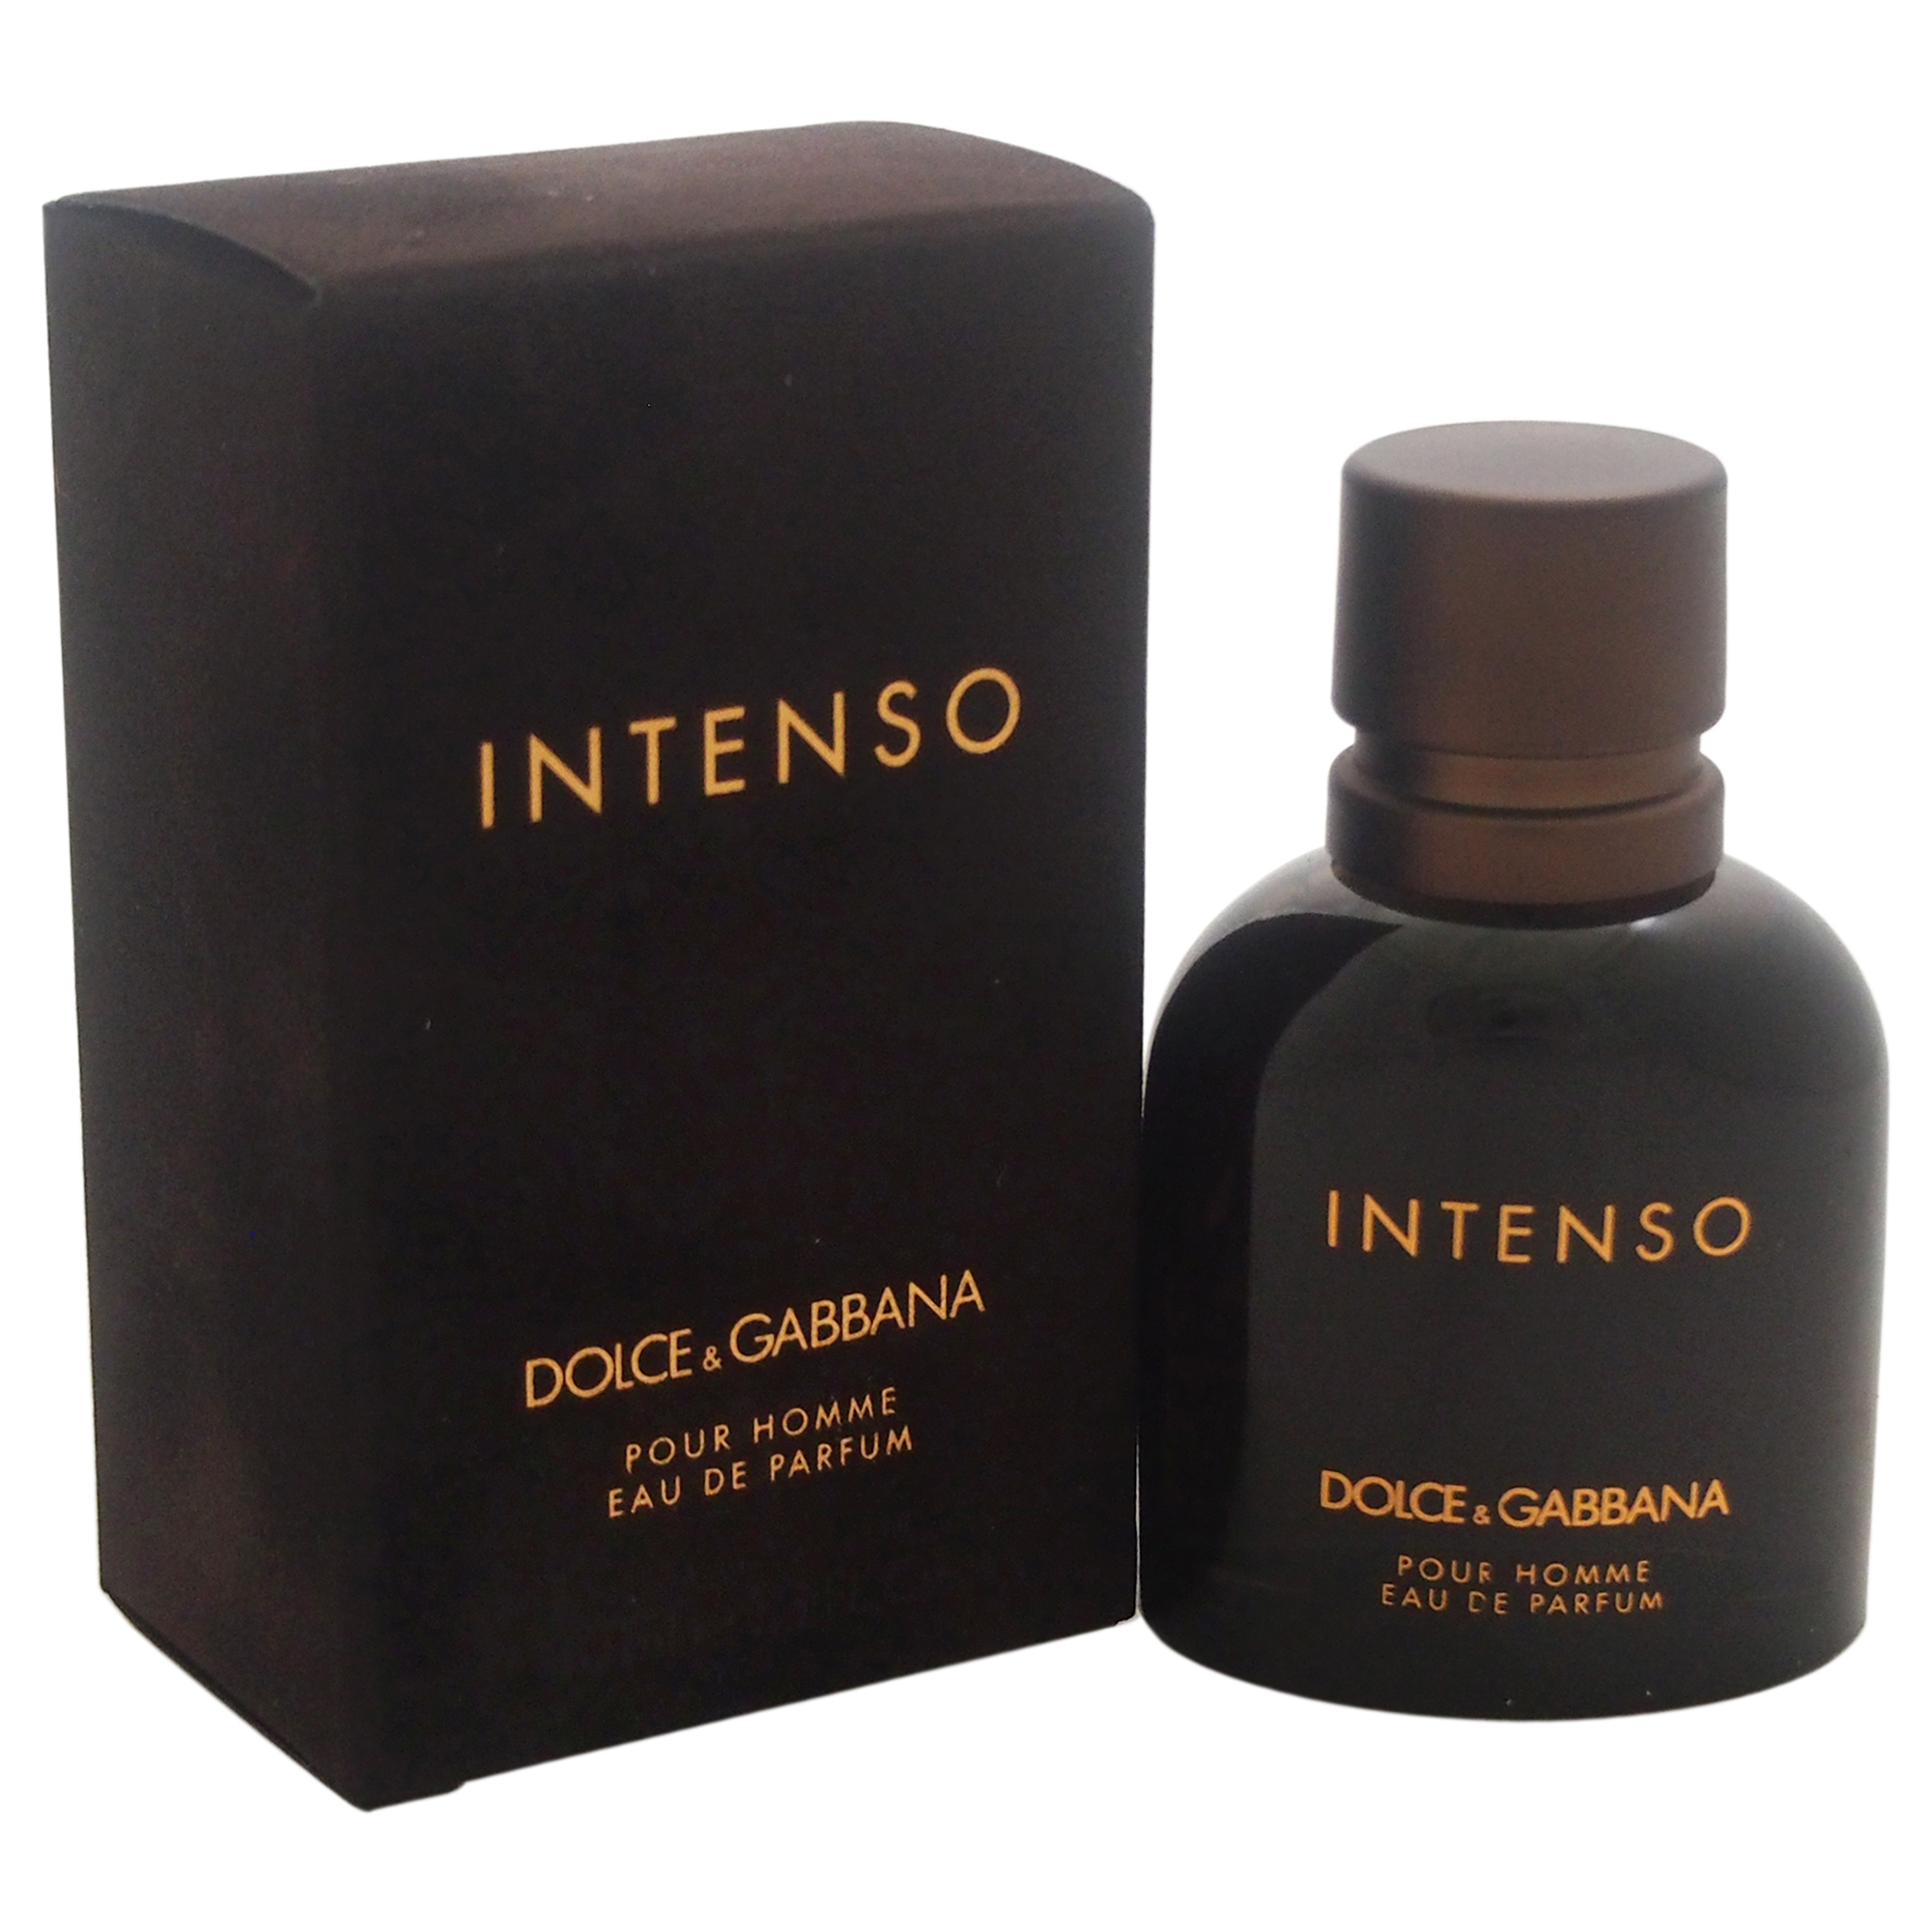 Pour Homme Intenso by Dolce & Gabbana for Men - 1.3 oz EDP Spray